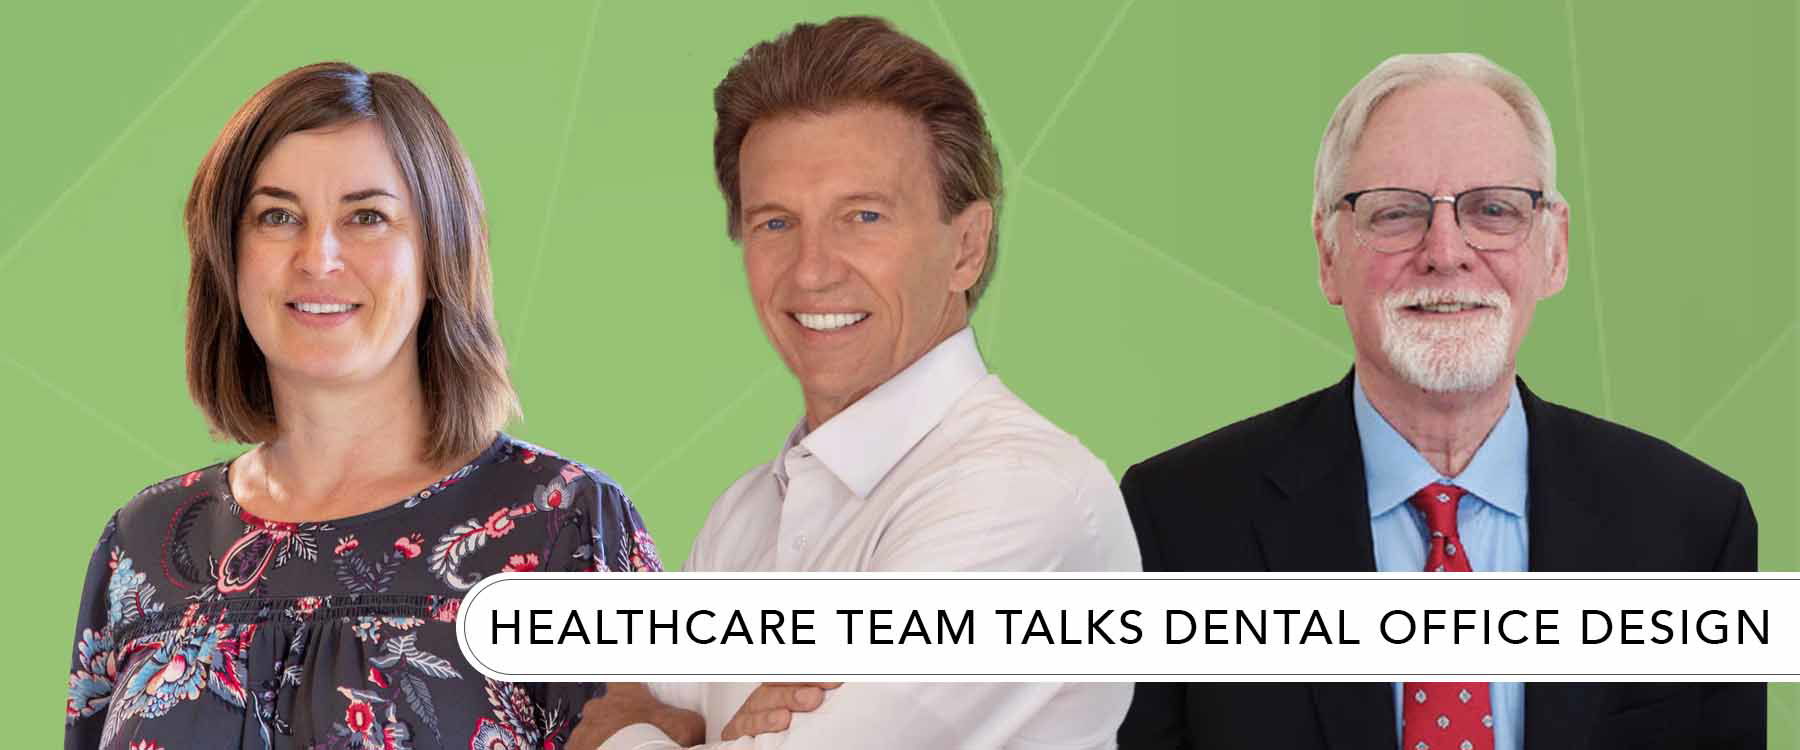 Members of the Healthcare Design team, Renee Moe, AIA, EDAC, Jeff Carter, DDS, talk with and Stan Kinder on his Podcast 'Success Strategies for Dental Practice Owners'.